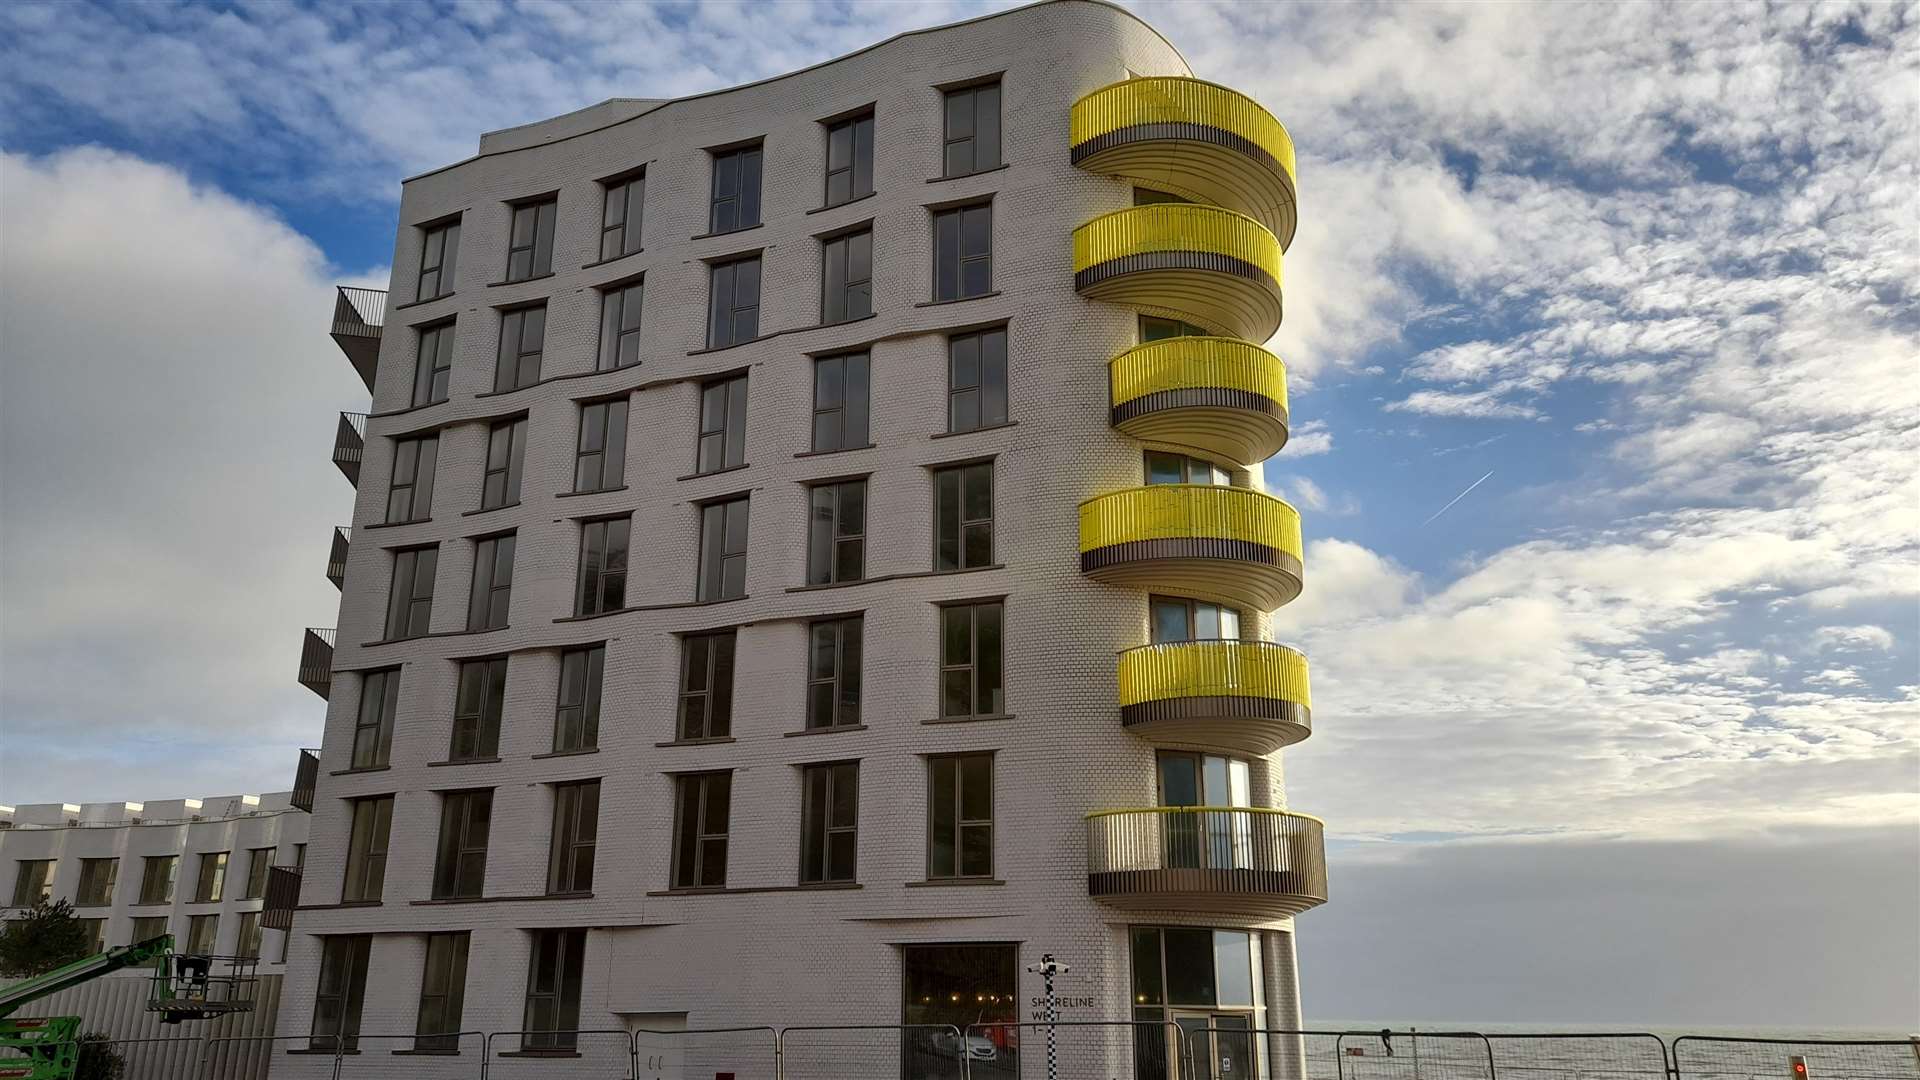 The yellow covers appeared on the balconies this week